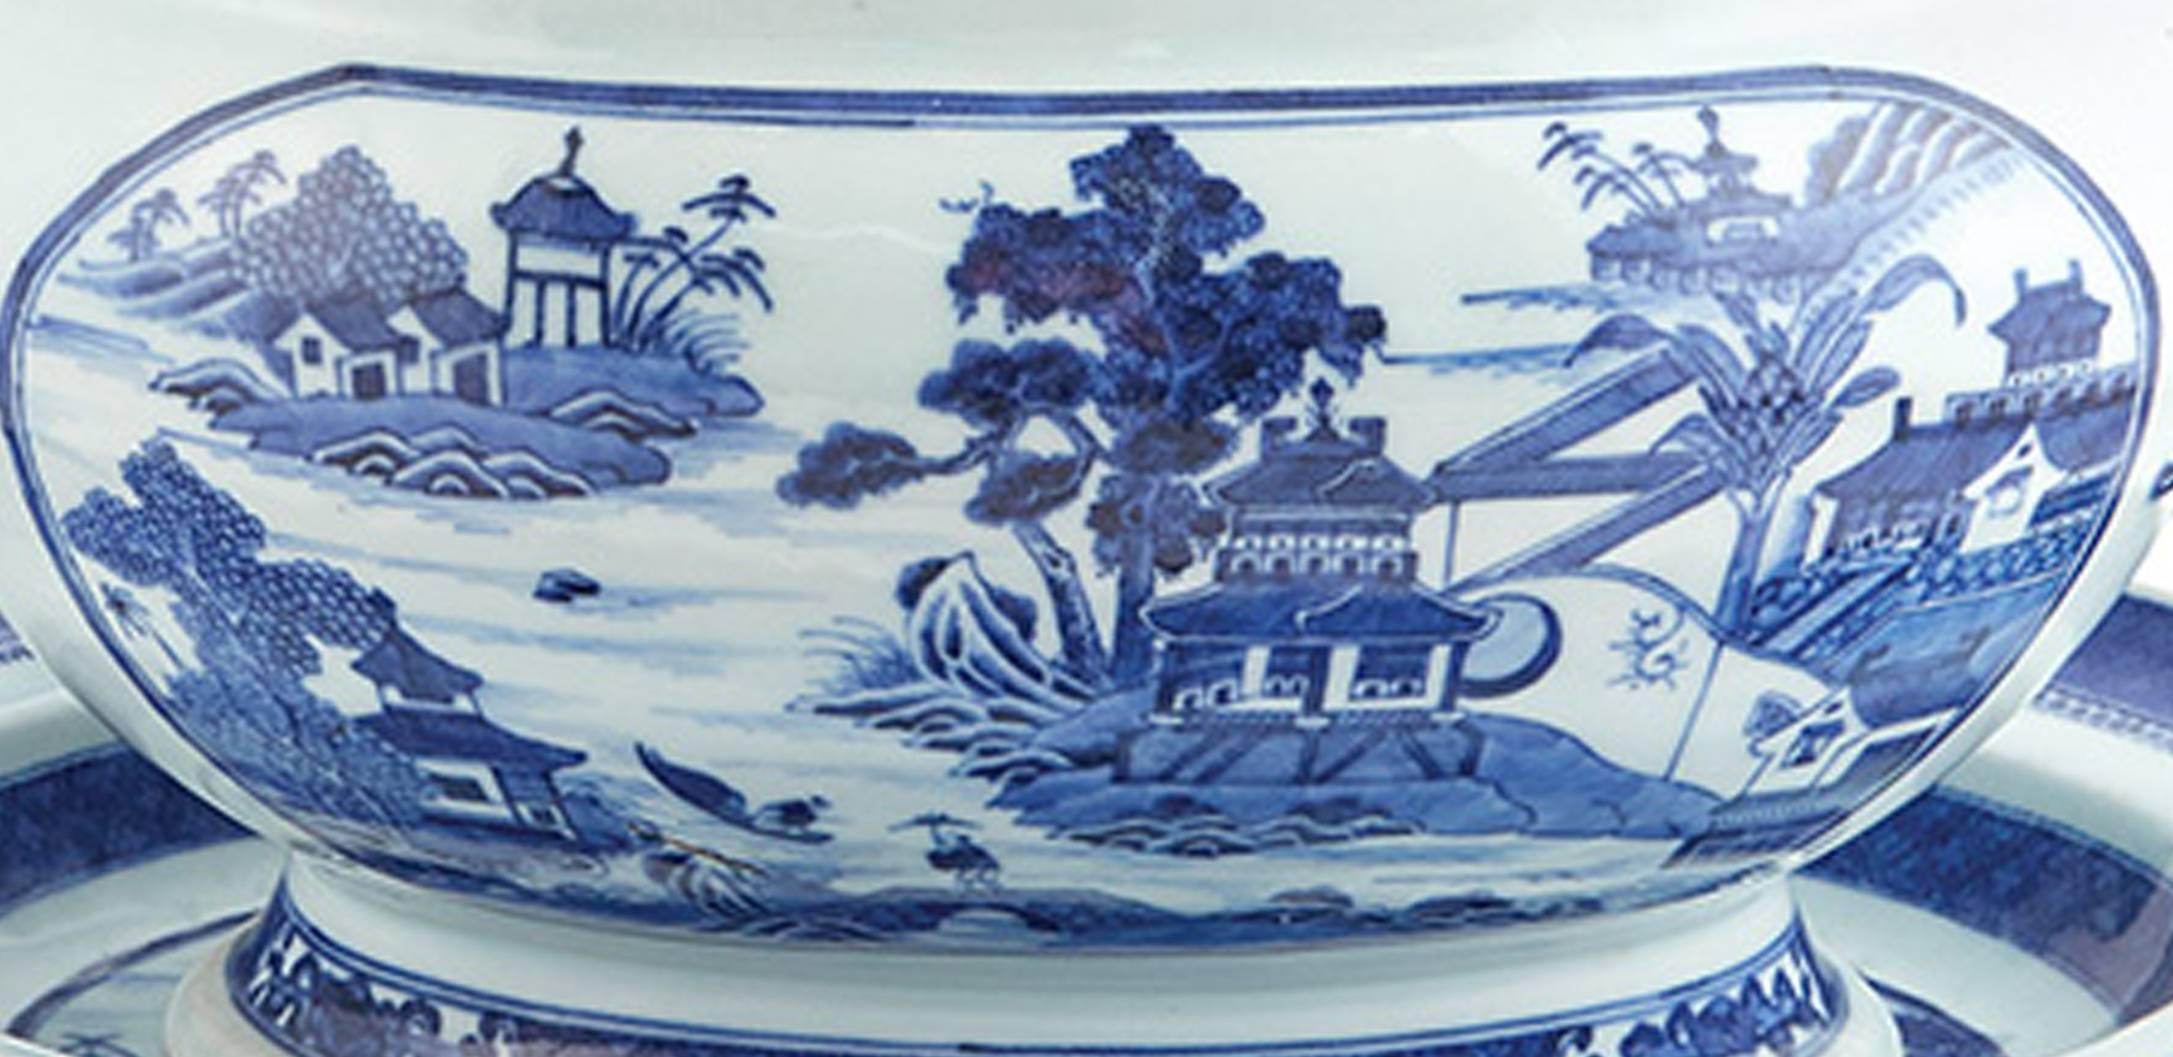 Chinese Export Nanking blue and white porcelain soup tureens, covers and stands, circa 1790-1820.

A superb pair of large Chinese Export porcelain underglaze blue tureens, covers and stands painted with Chinese landscapes and gardens within oval